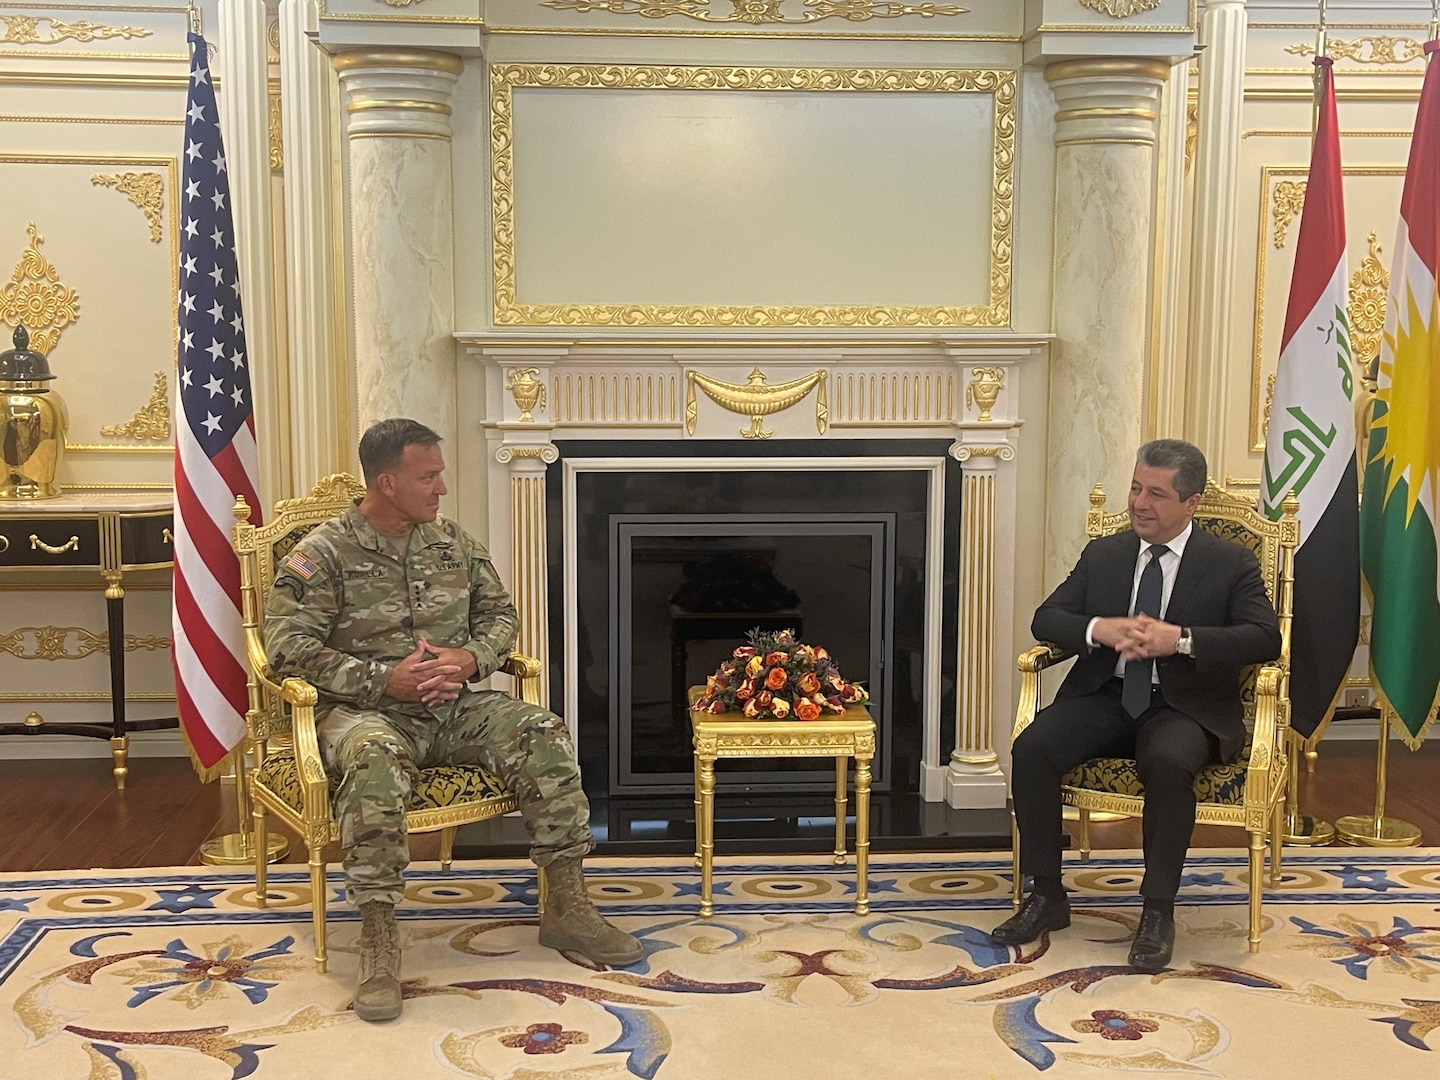 General Michael “Erik” Kurilla, commander of U.S. Central Command, met with Masrour Barzani, Prime Minister of the Kurdish Regional Government in Erbil, Iraq, on Sept. 8. The two leaders discussed matters of mutual interest, to include the ongoing clearing operations in the al-Hol internal displaced persons camp and CENTCOM’s commitment to the enduring defeat of ISIS.